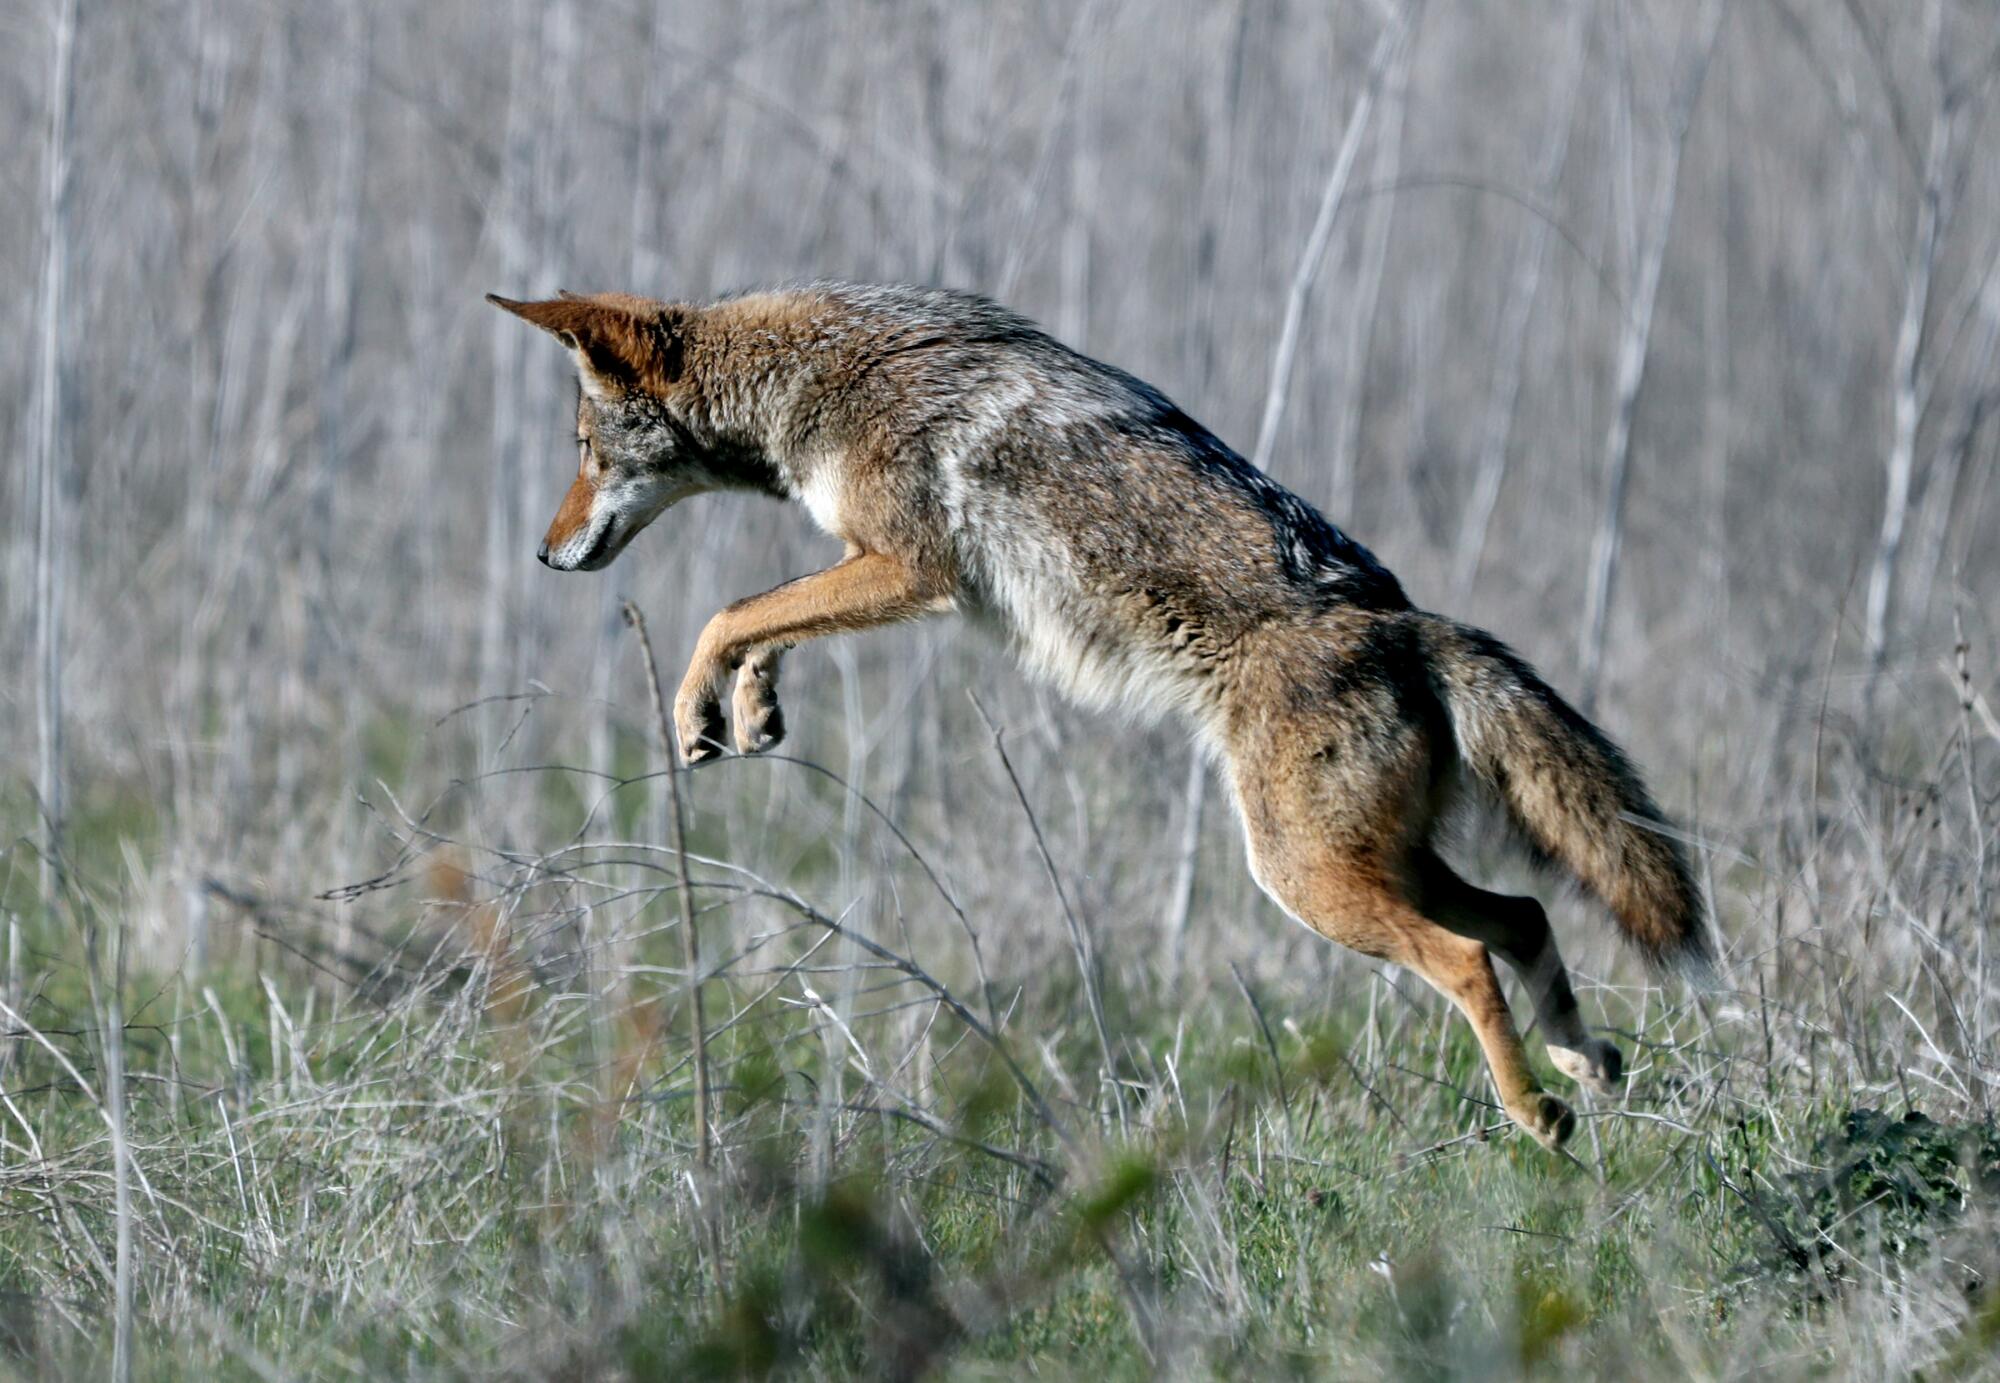 A leaping coyote